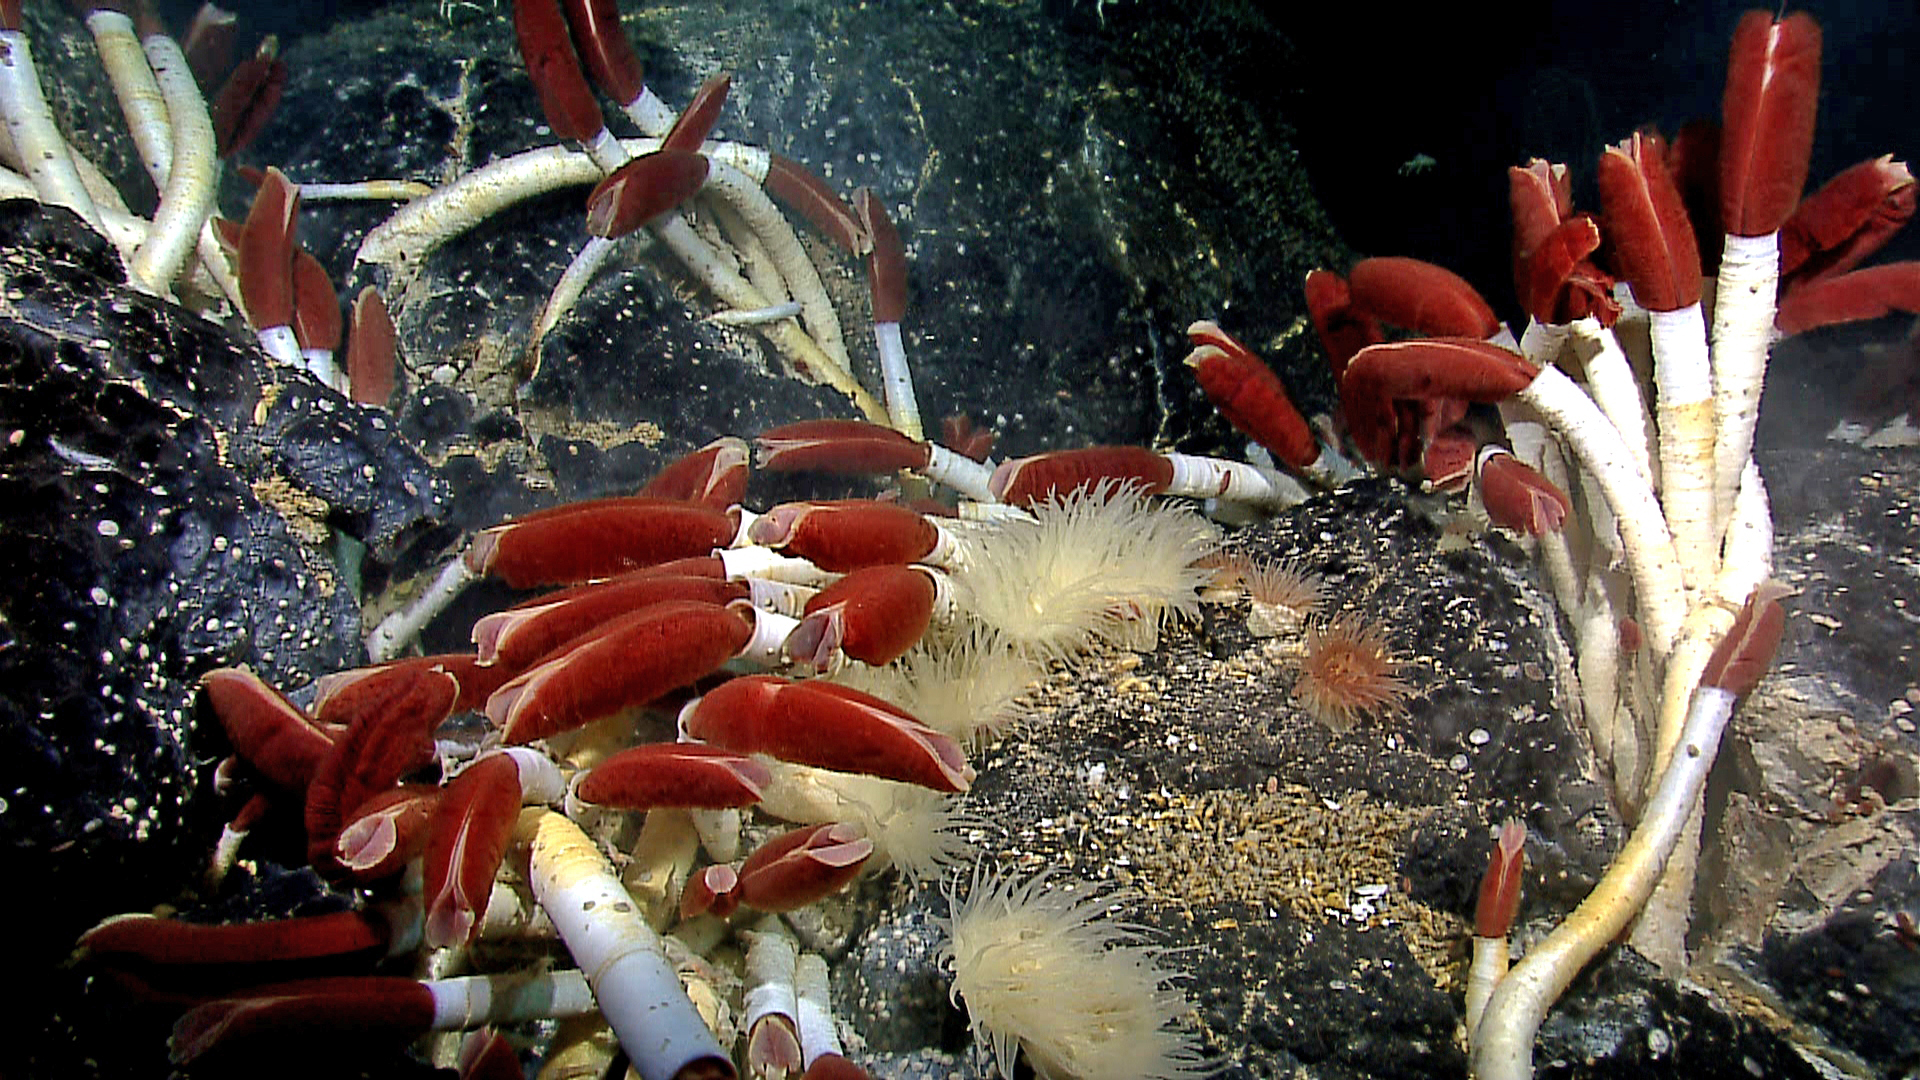 Giant tube worms around a hydrothermal vent, Galapagos Islands